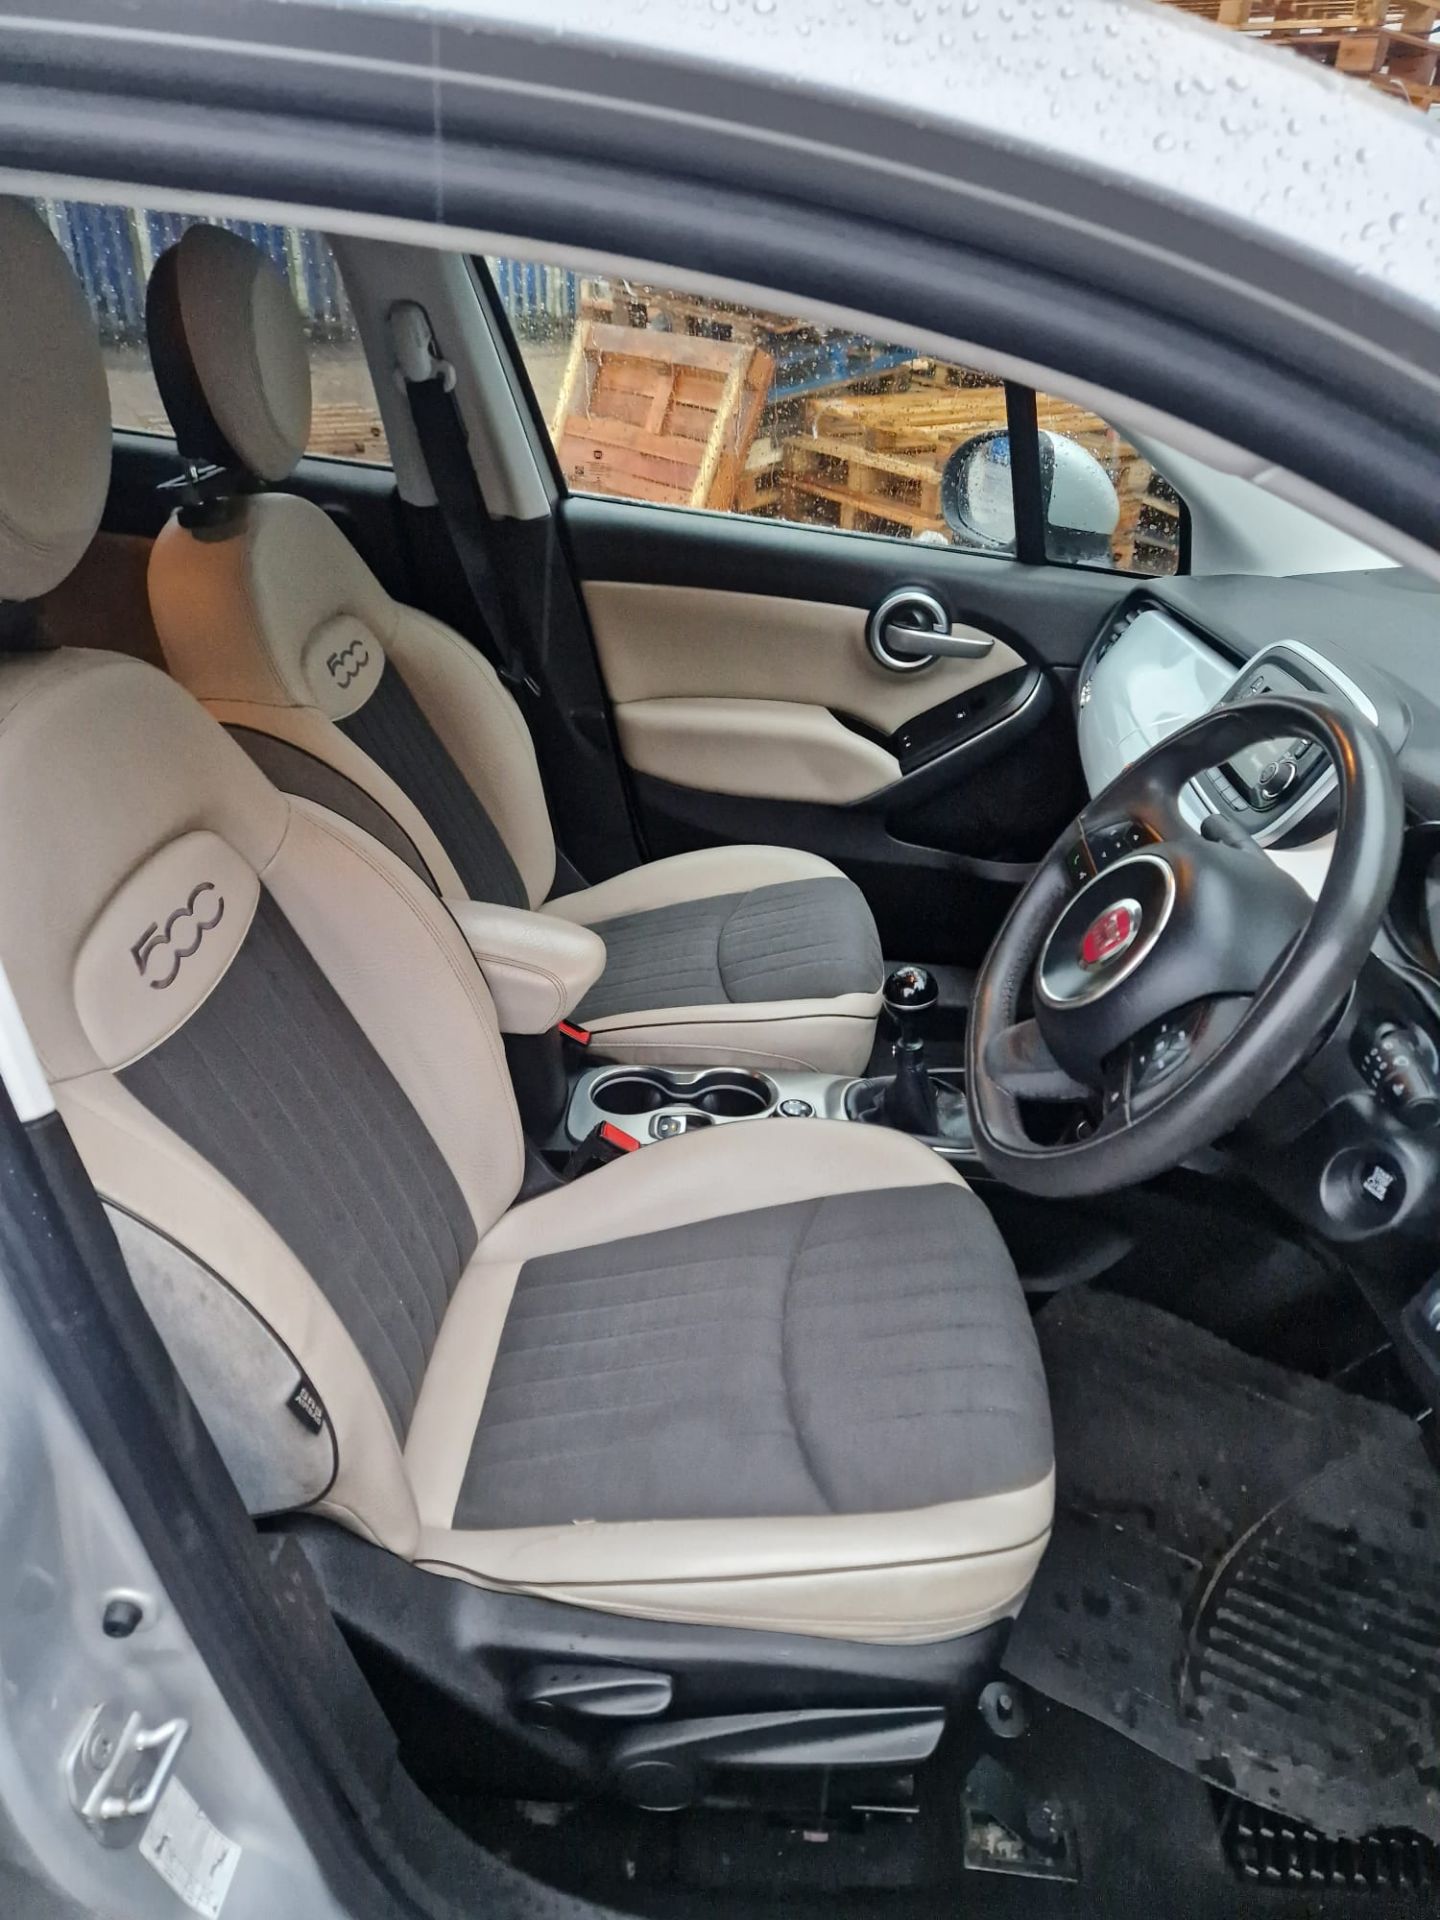 65 plate Fiat 500X Lounge multi air 1.4i, MOT until 1/10/2024, 84190 miles (unchecked), comes with 2 - Image 11 of 40